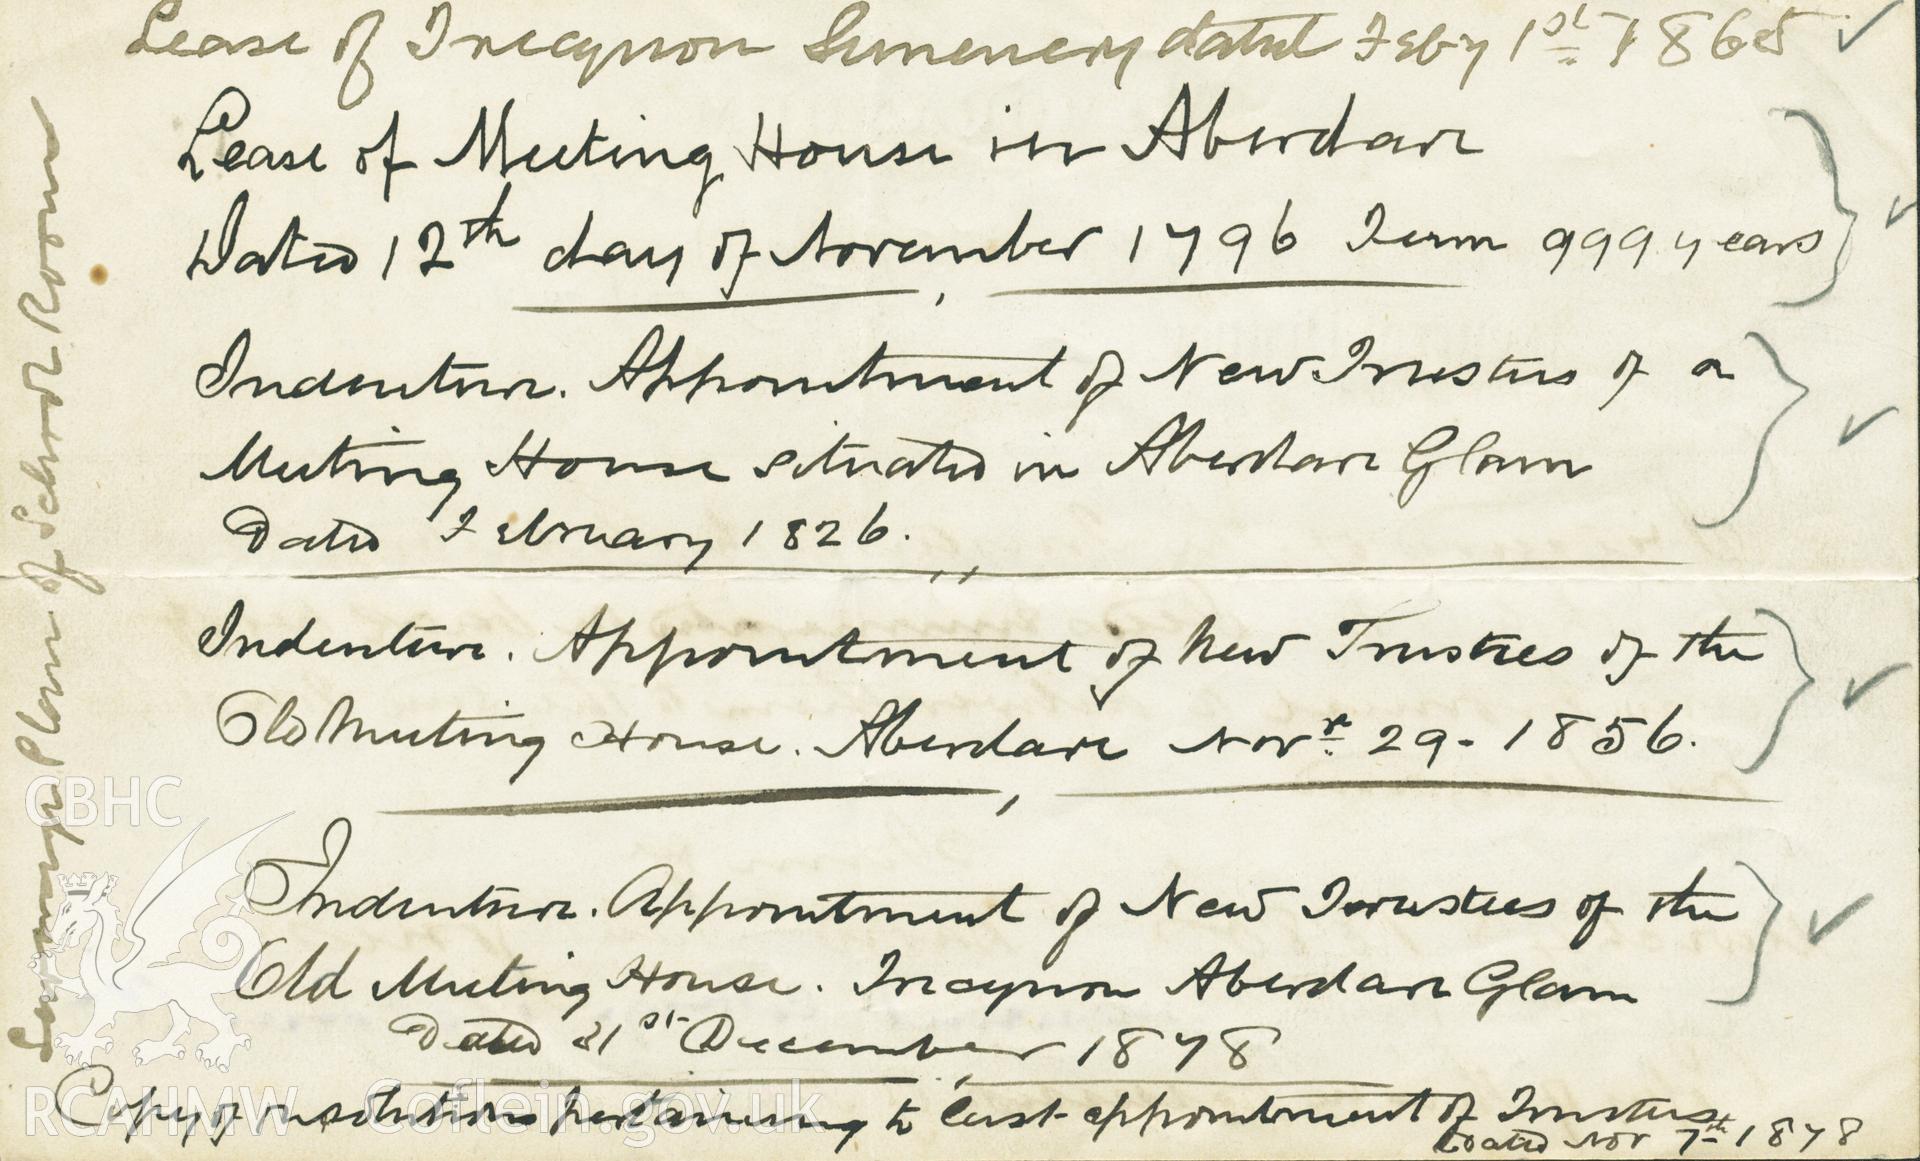 List of important dates in the history of yr Hen Dy Cwrdd, possibly the reverse of memorandum from David J. Jones, dated 4th March 1880 and 7th March 1892 (ref DDP/01/02/02/004). Donated to the RCAHMW during the Digital Dissent Project.